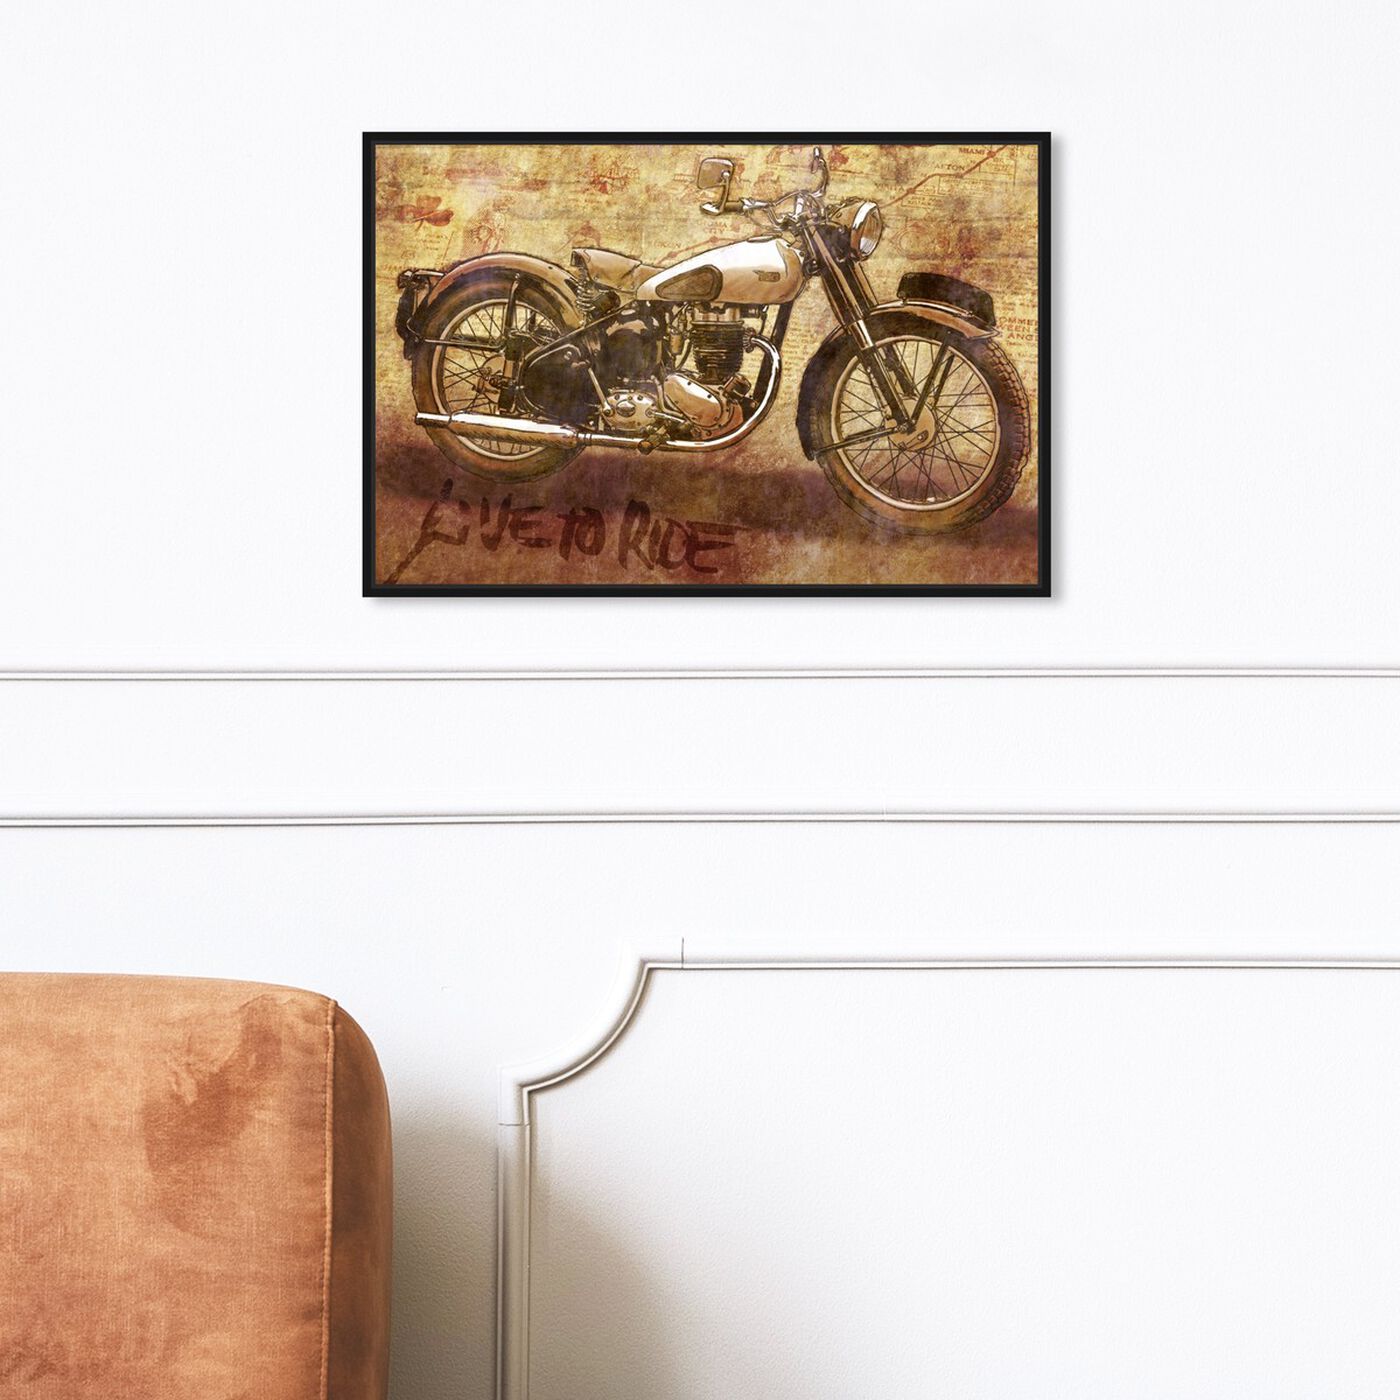 Hanging view of Live to Ride featuring transportation and motorcycles art.